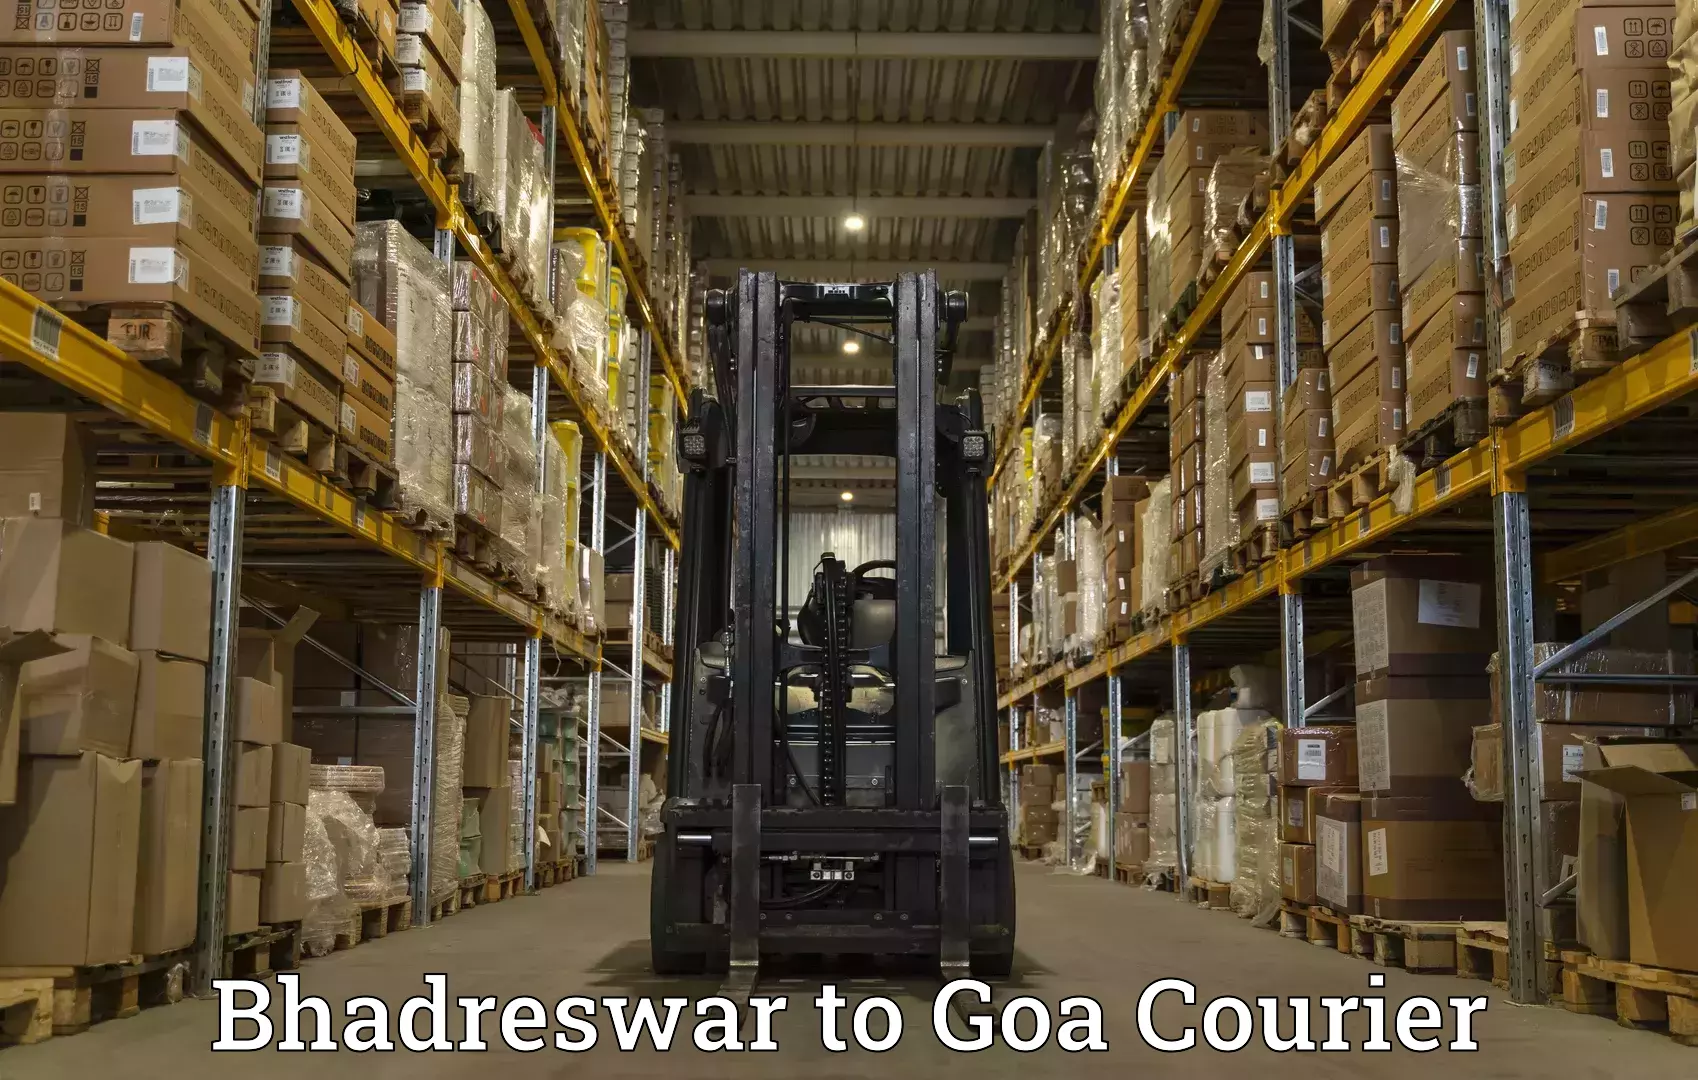 Global shipping networks Bhadreswar to Margao